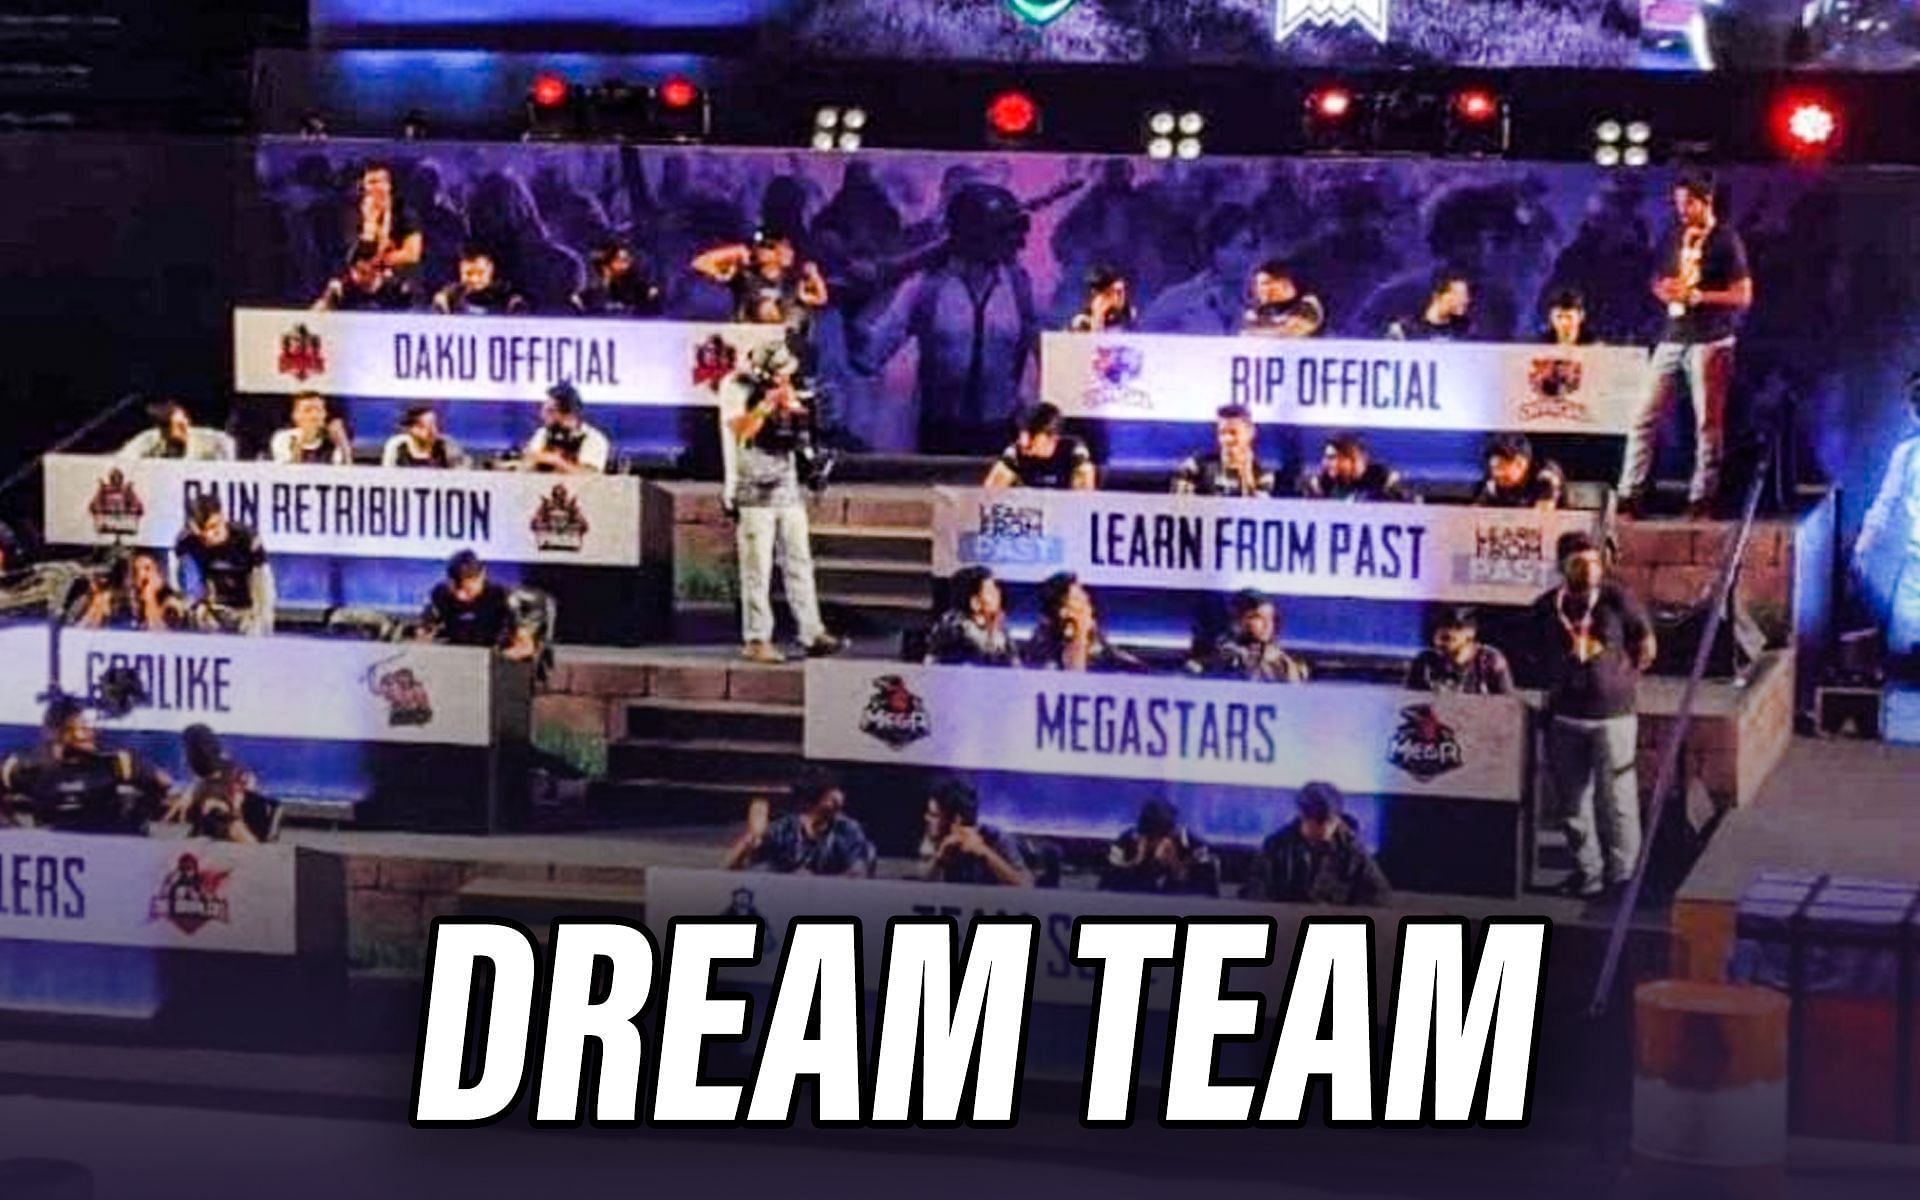 A new Dream Team event is available in the game (Image via Sportskeeda)